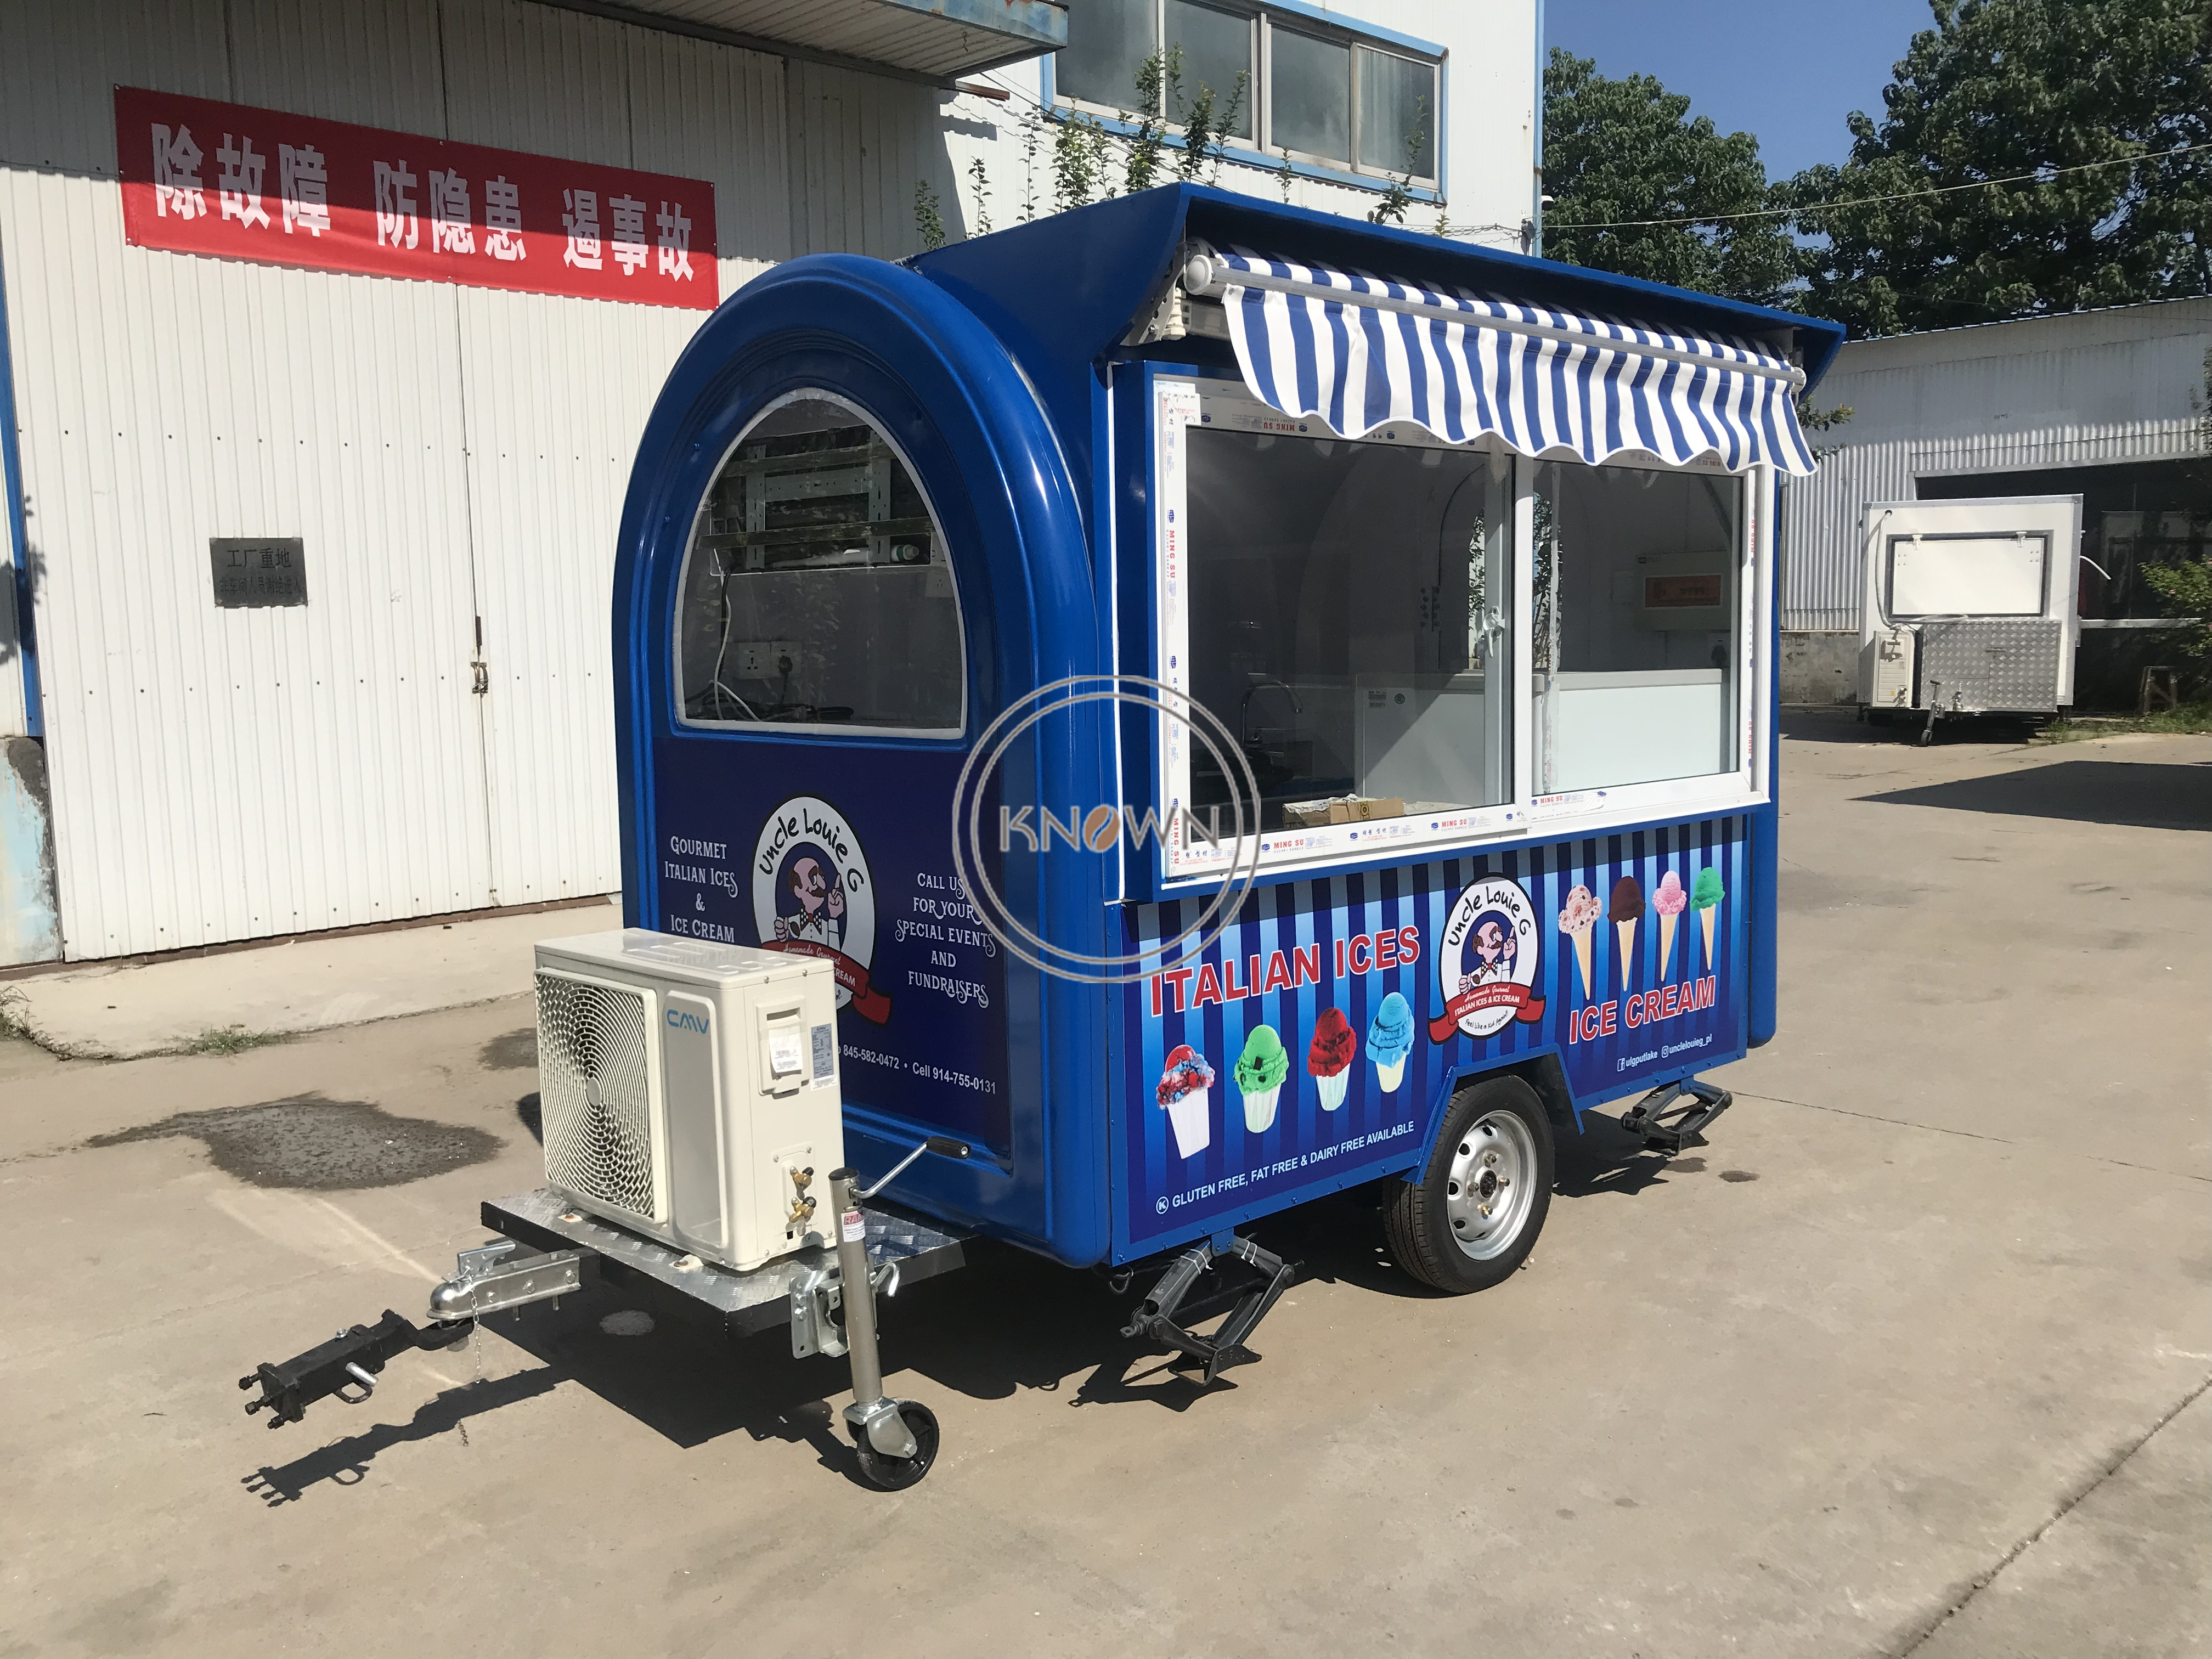 KN-FR-250H Mobile Food Carts Trailer Hot Sale Commercial Factory Price Catering Food Kiosk